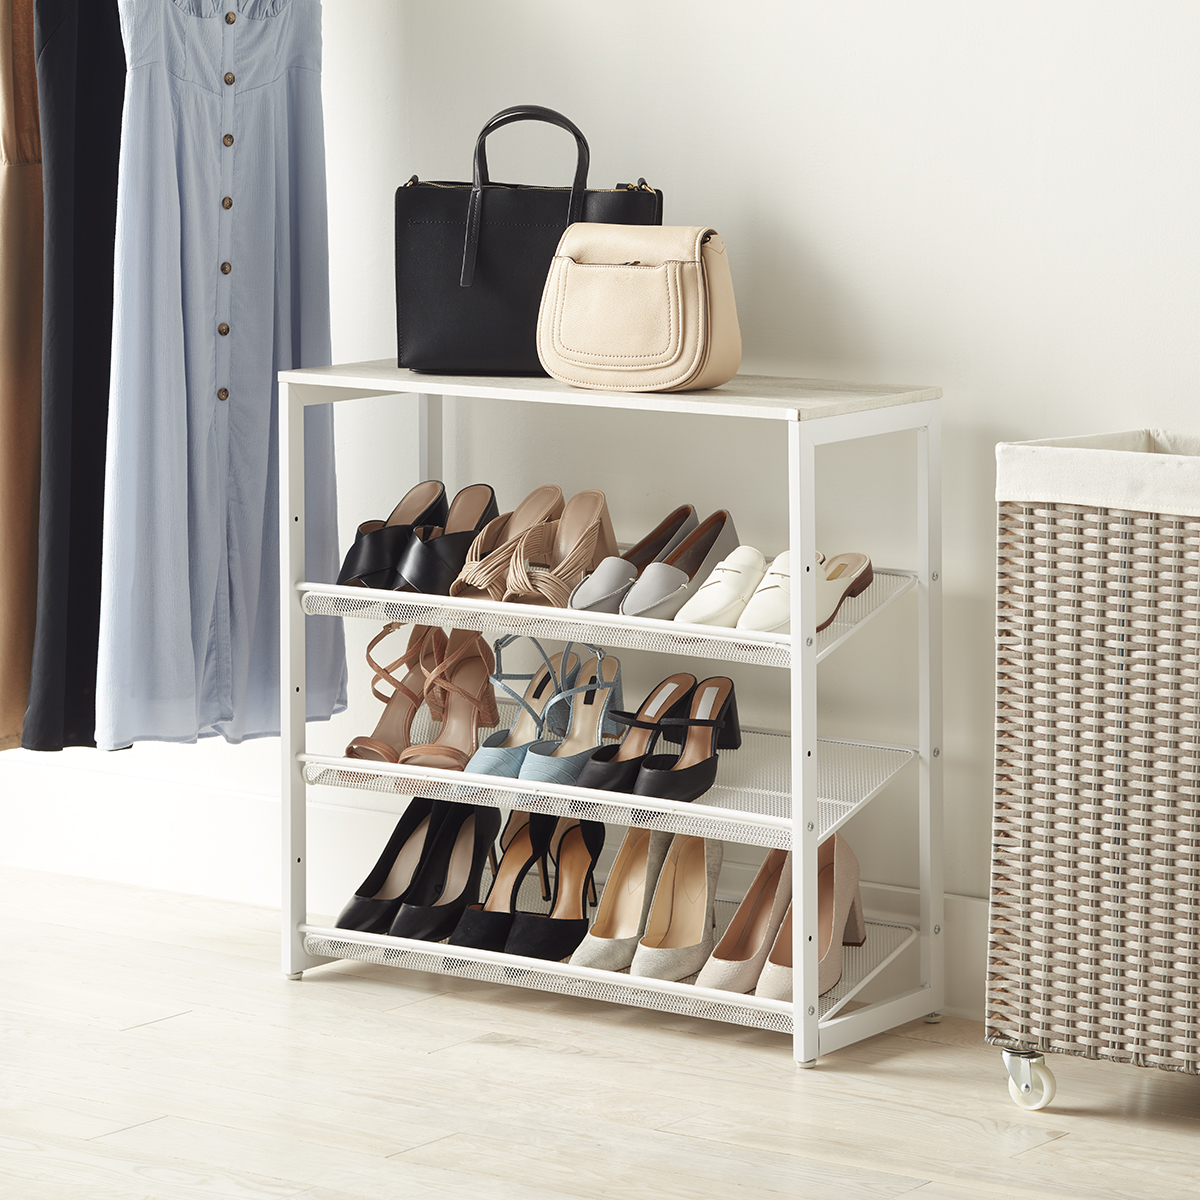 https://www.containerstore.com/catalogimages/428210/10084725-3-tier-mesh-shelves-white.jpg